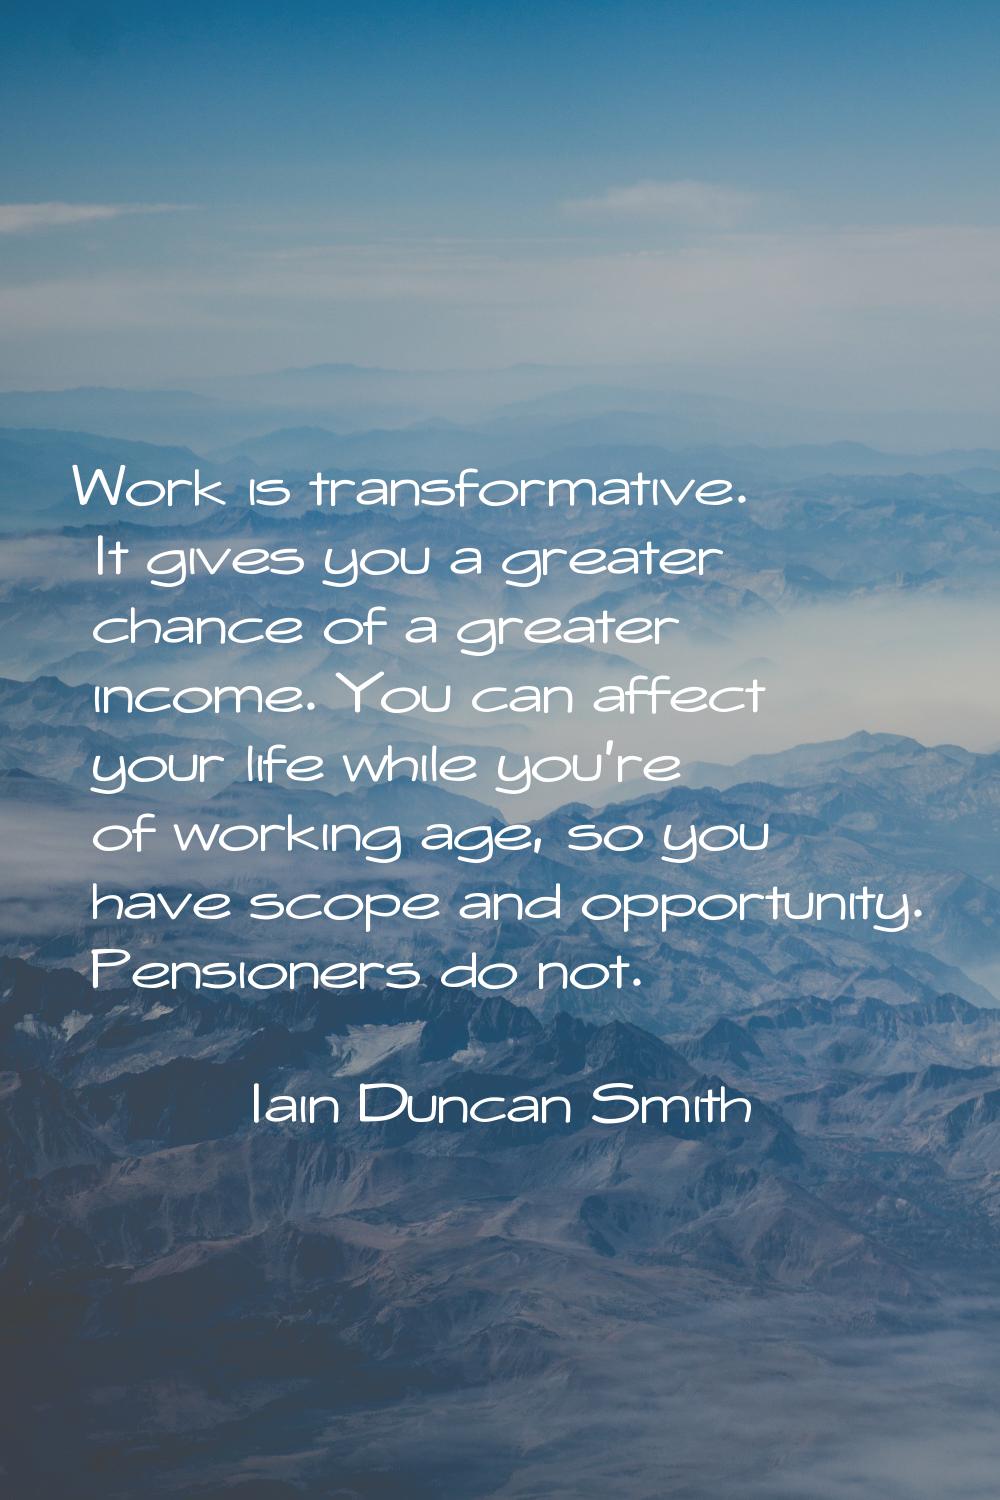 Work is transformative. It gives you a greater chance of a greater income. You can affect your life